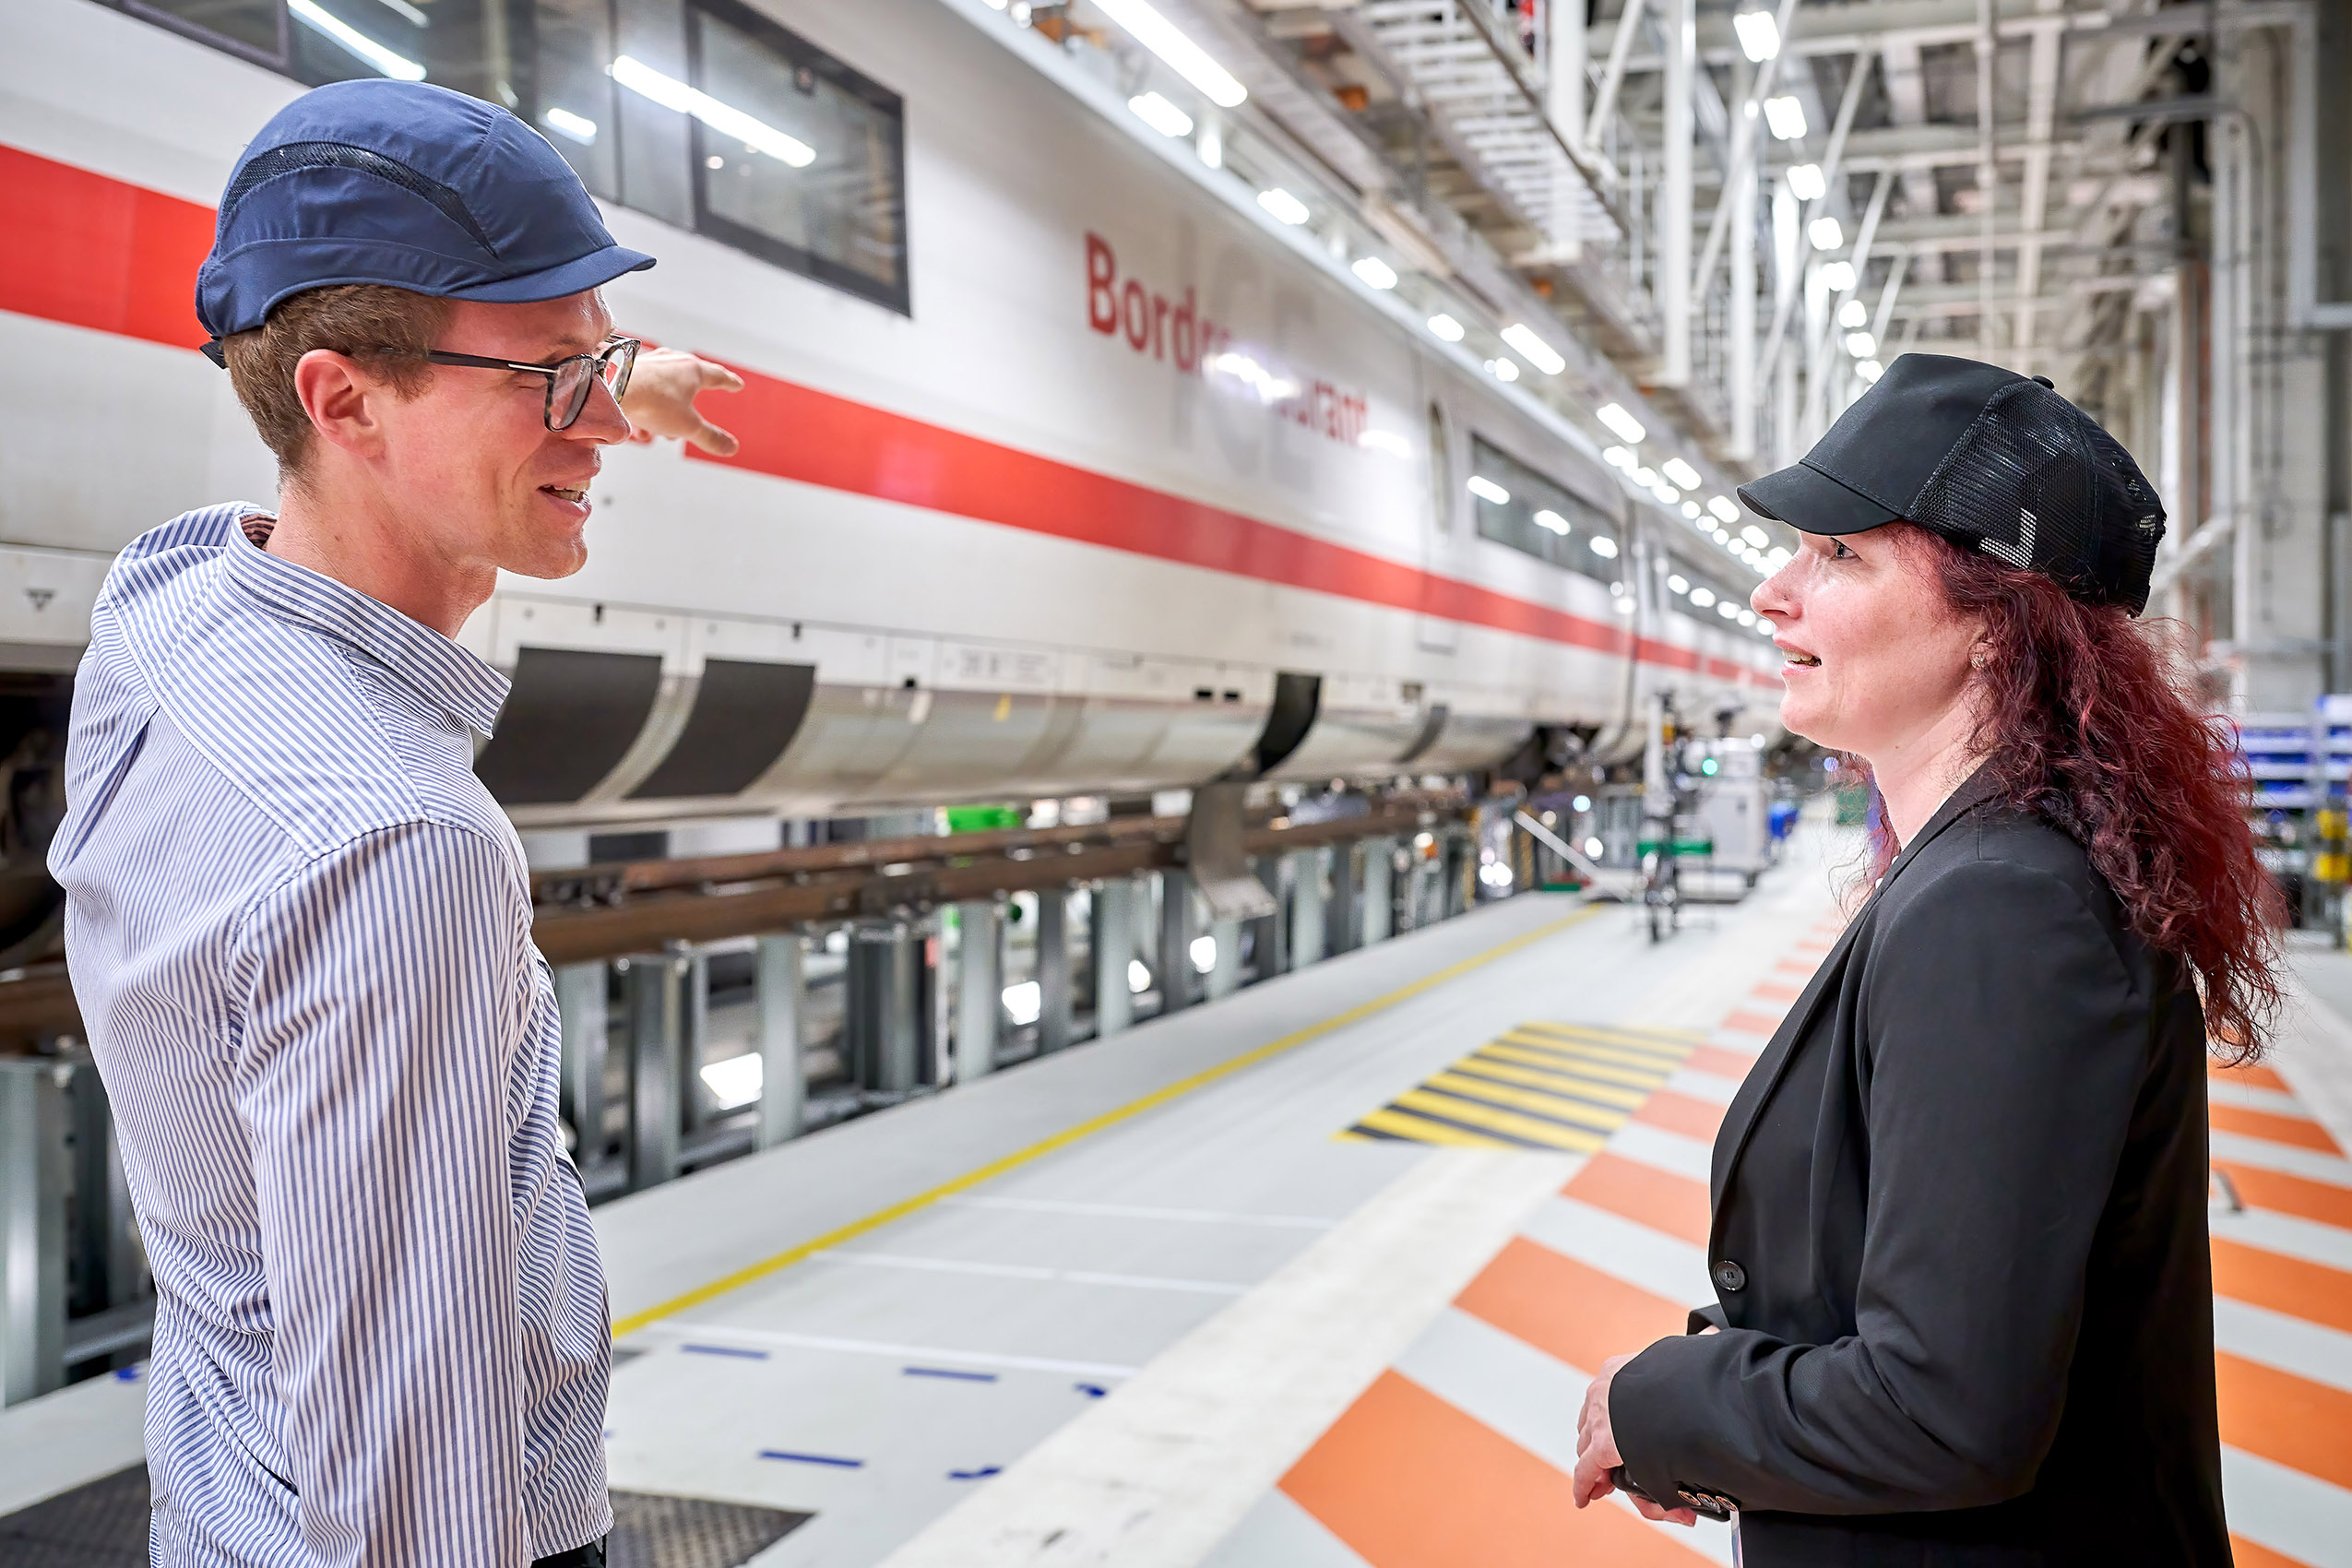 Consultation: Sonja Askew studied engineering after training as a mechatronics specialist. She values expert discussion, here with the assistant of the site’s manager David Urbild.